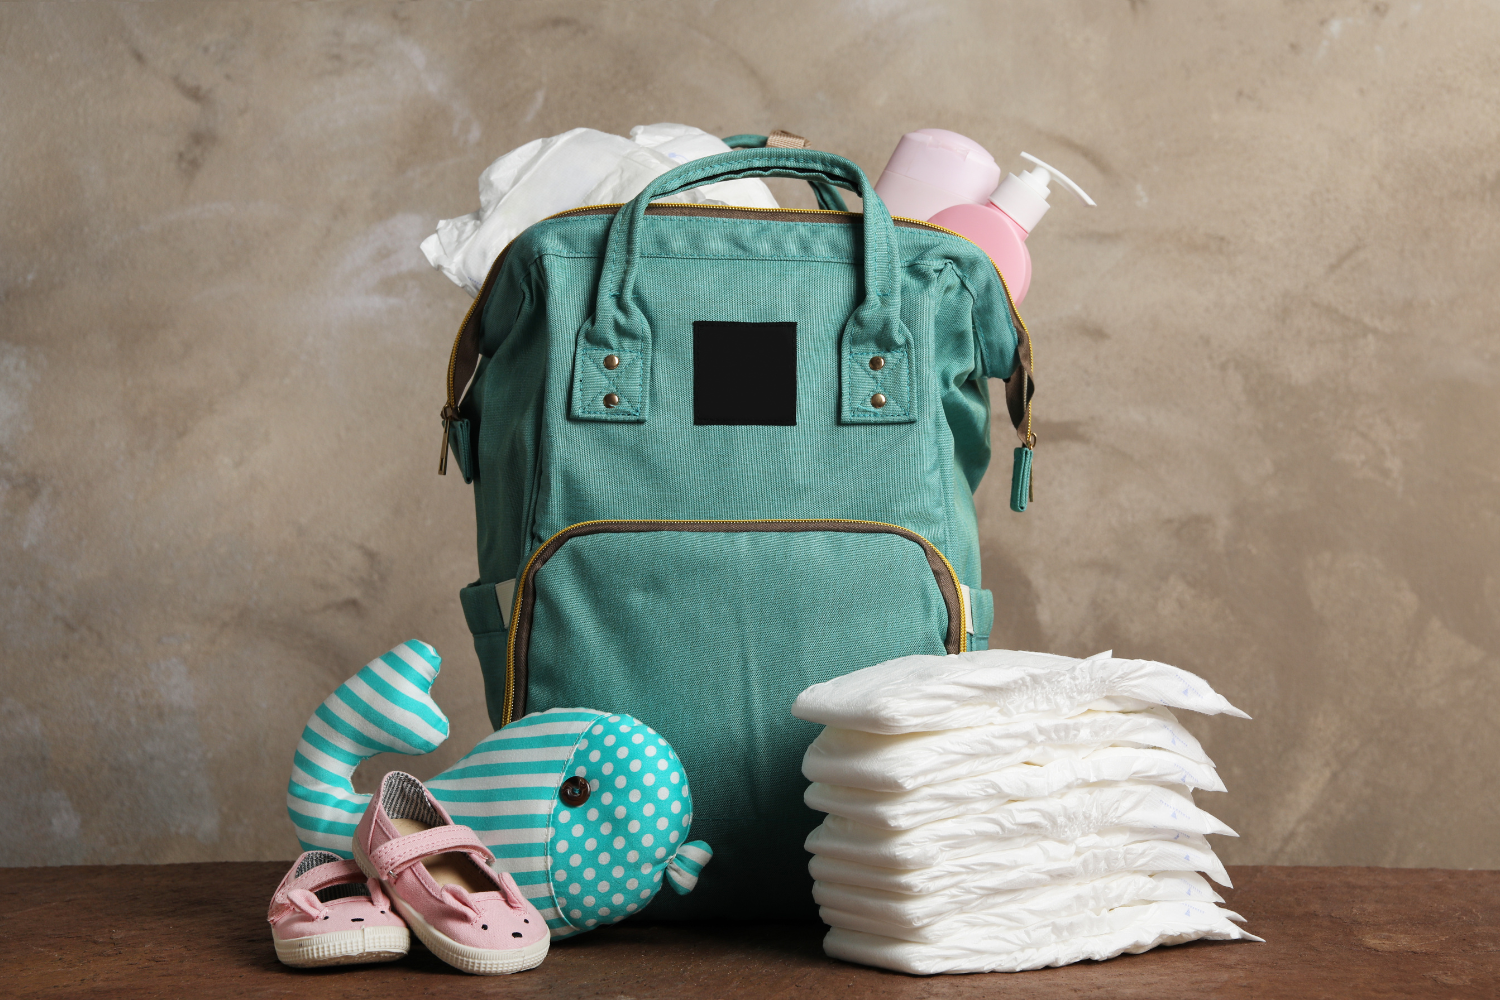 A Guide to Diaper Bag Essentials - Never Leave Home Without These